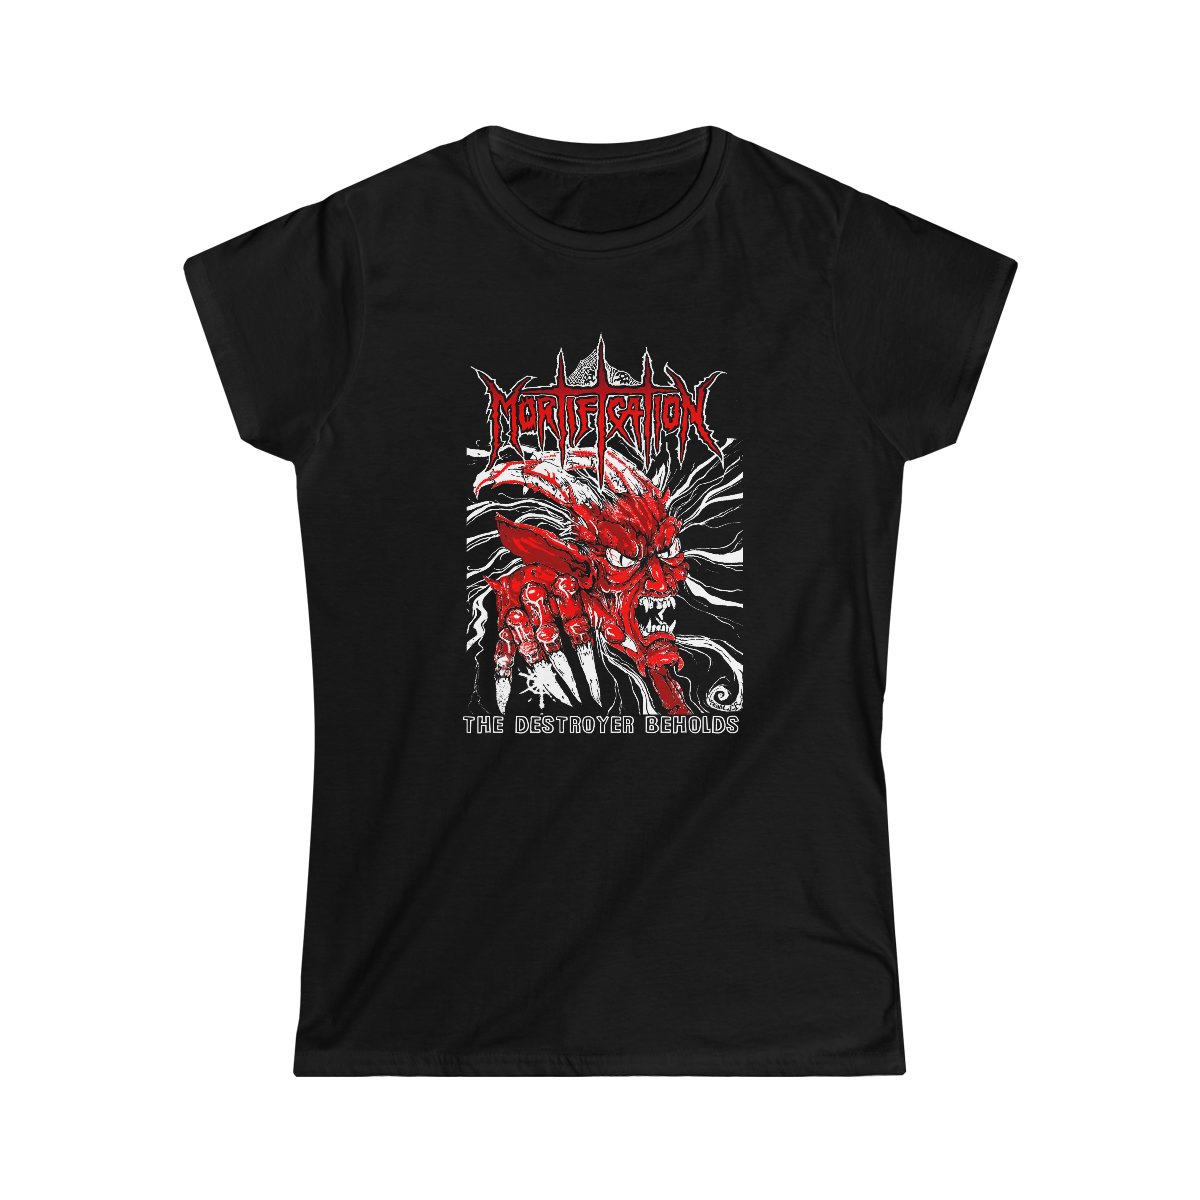 Mortification The Destroyer Beholds (Red) Women’s Short Sleeve Tshirt 64000LD